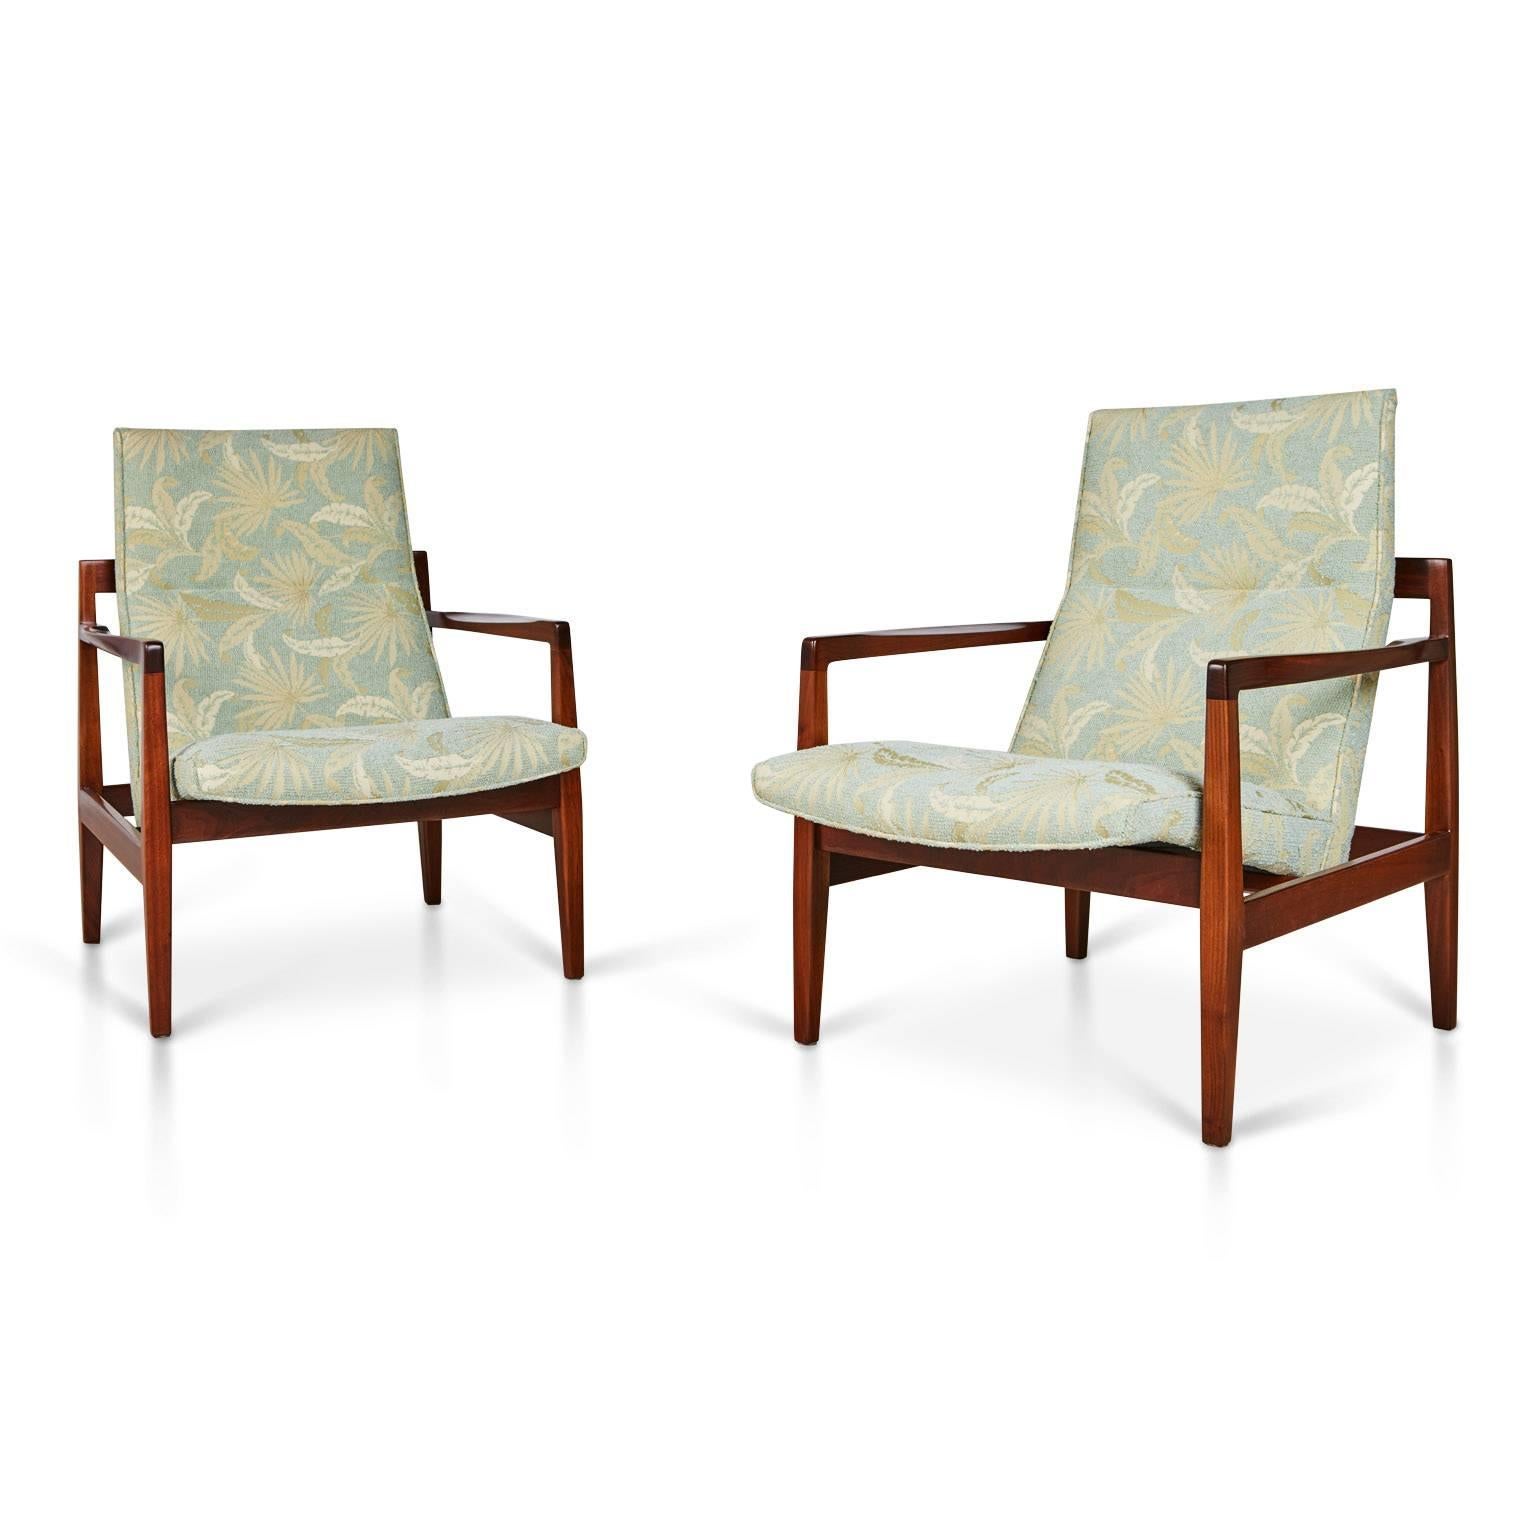 Danish born Risom introduced his trademark designs of simple, well-crafted modern furniture to America, this pair of lounge chairs being a testament of those principals. 

This pair of floating walnut framed lounge chairs have been newly